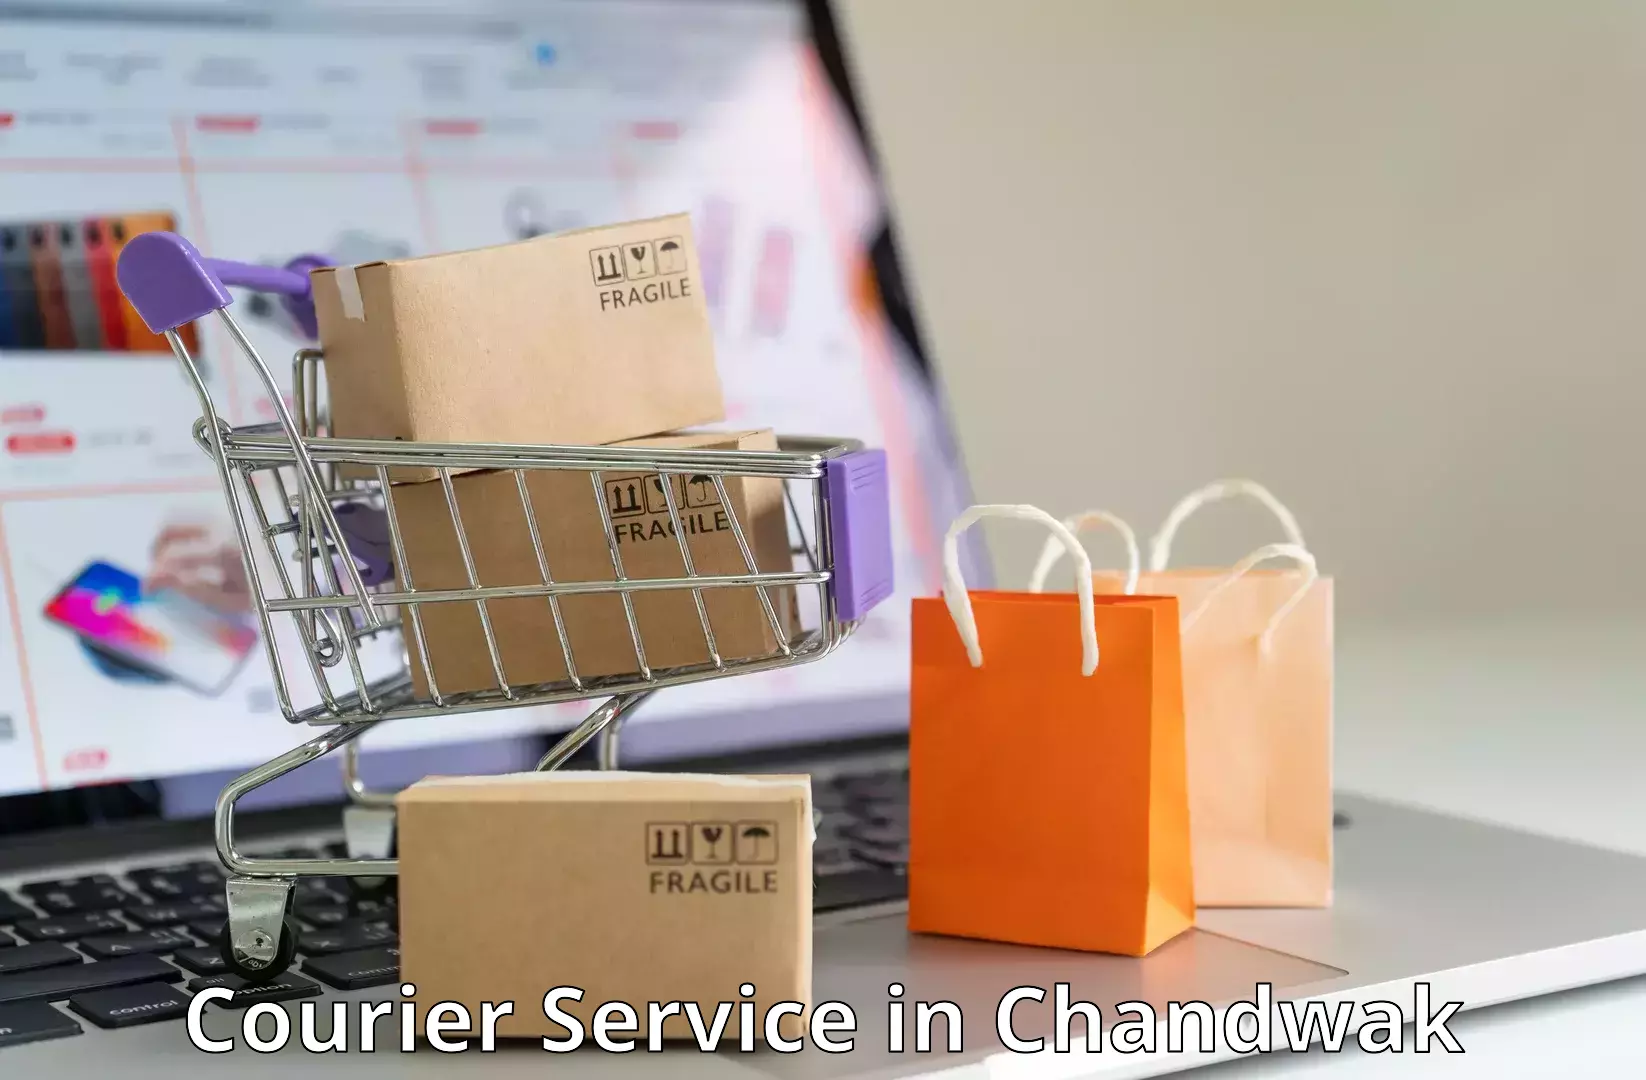 Seamless shipping service in Chandwak